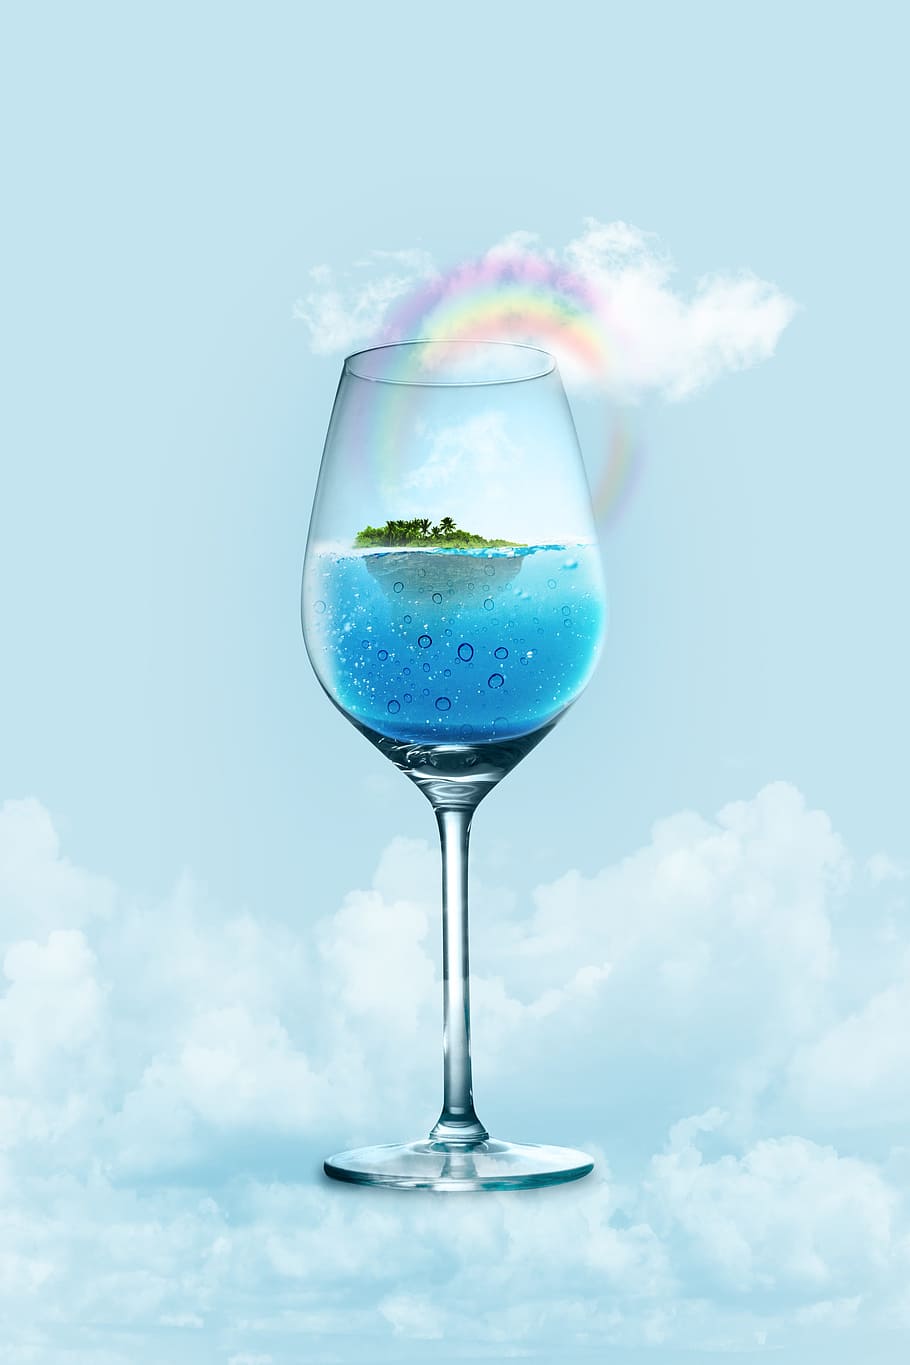 water, drink, glass, transparent, soft, chilled, food and drink, refreshment, cloud - sky, alcohol